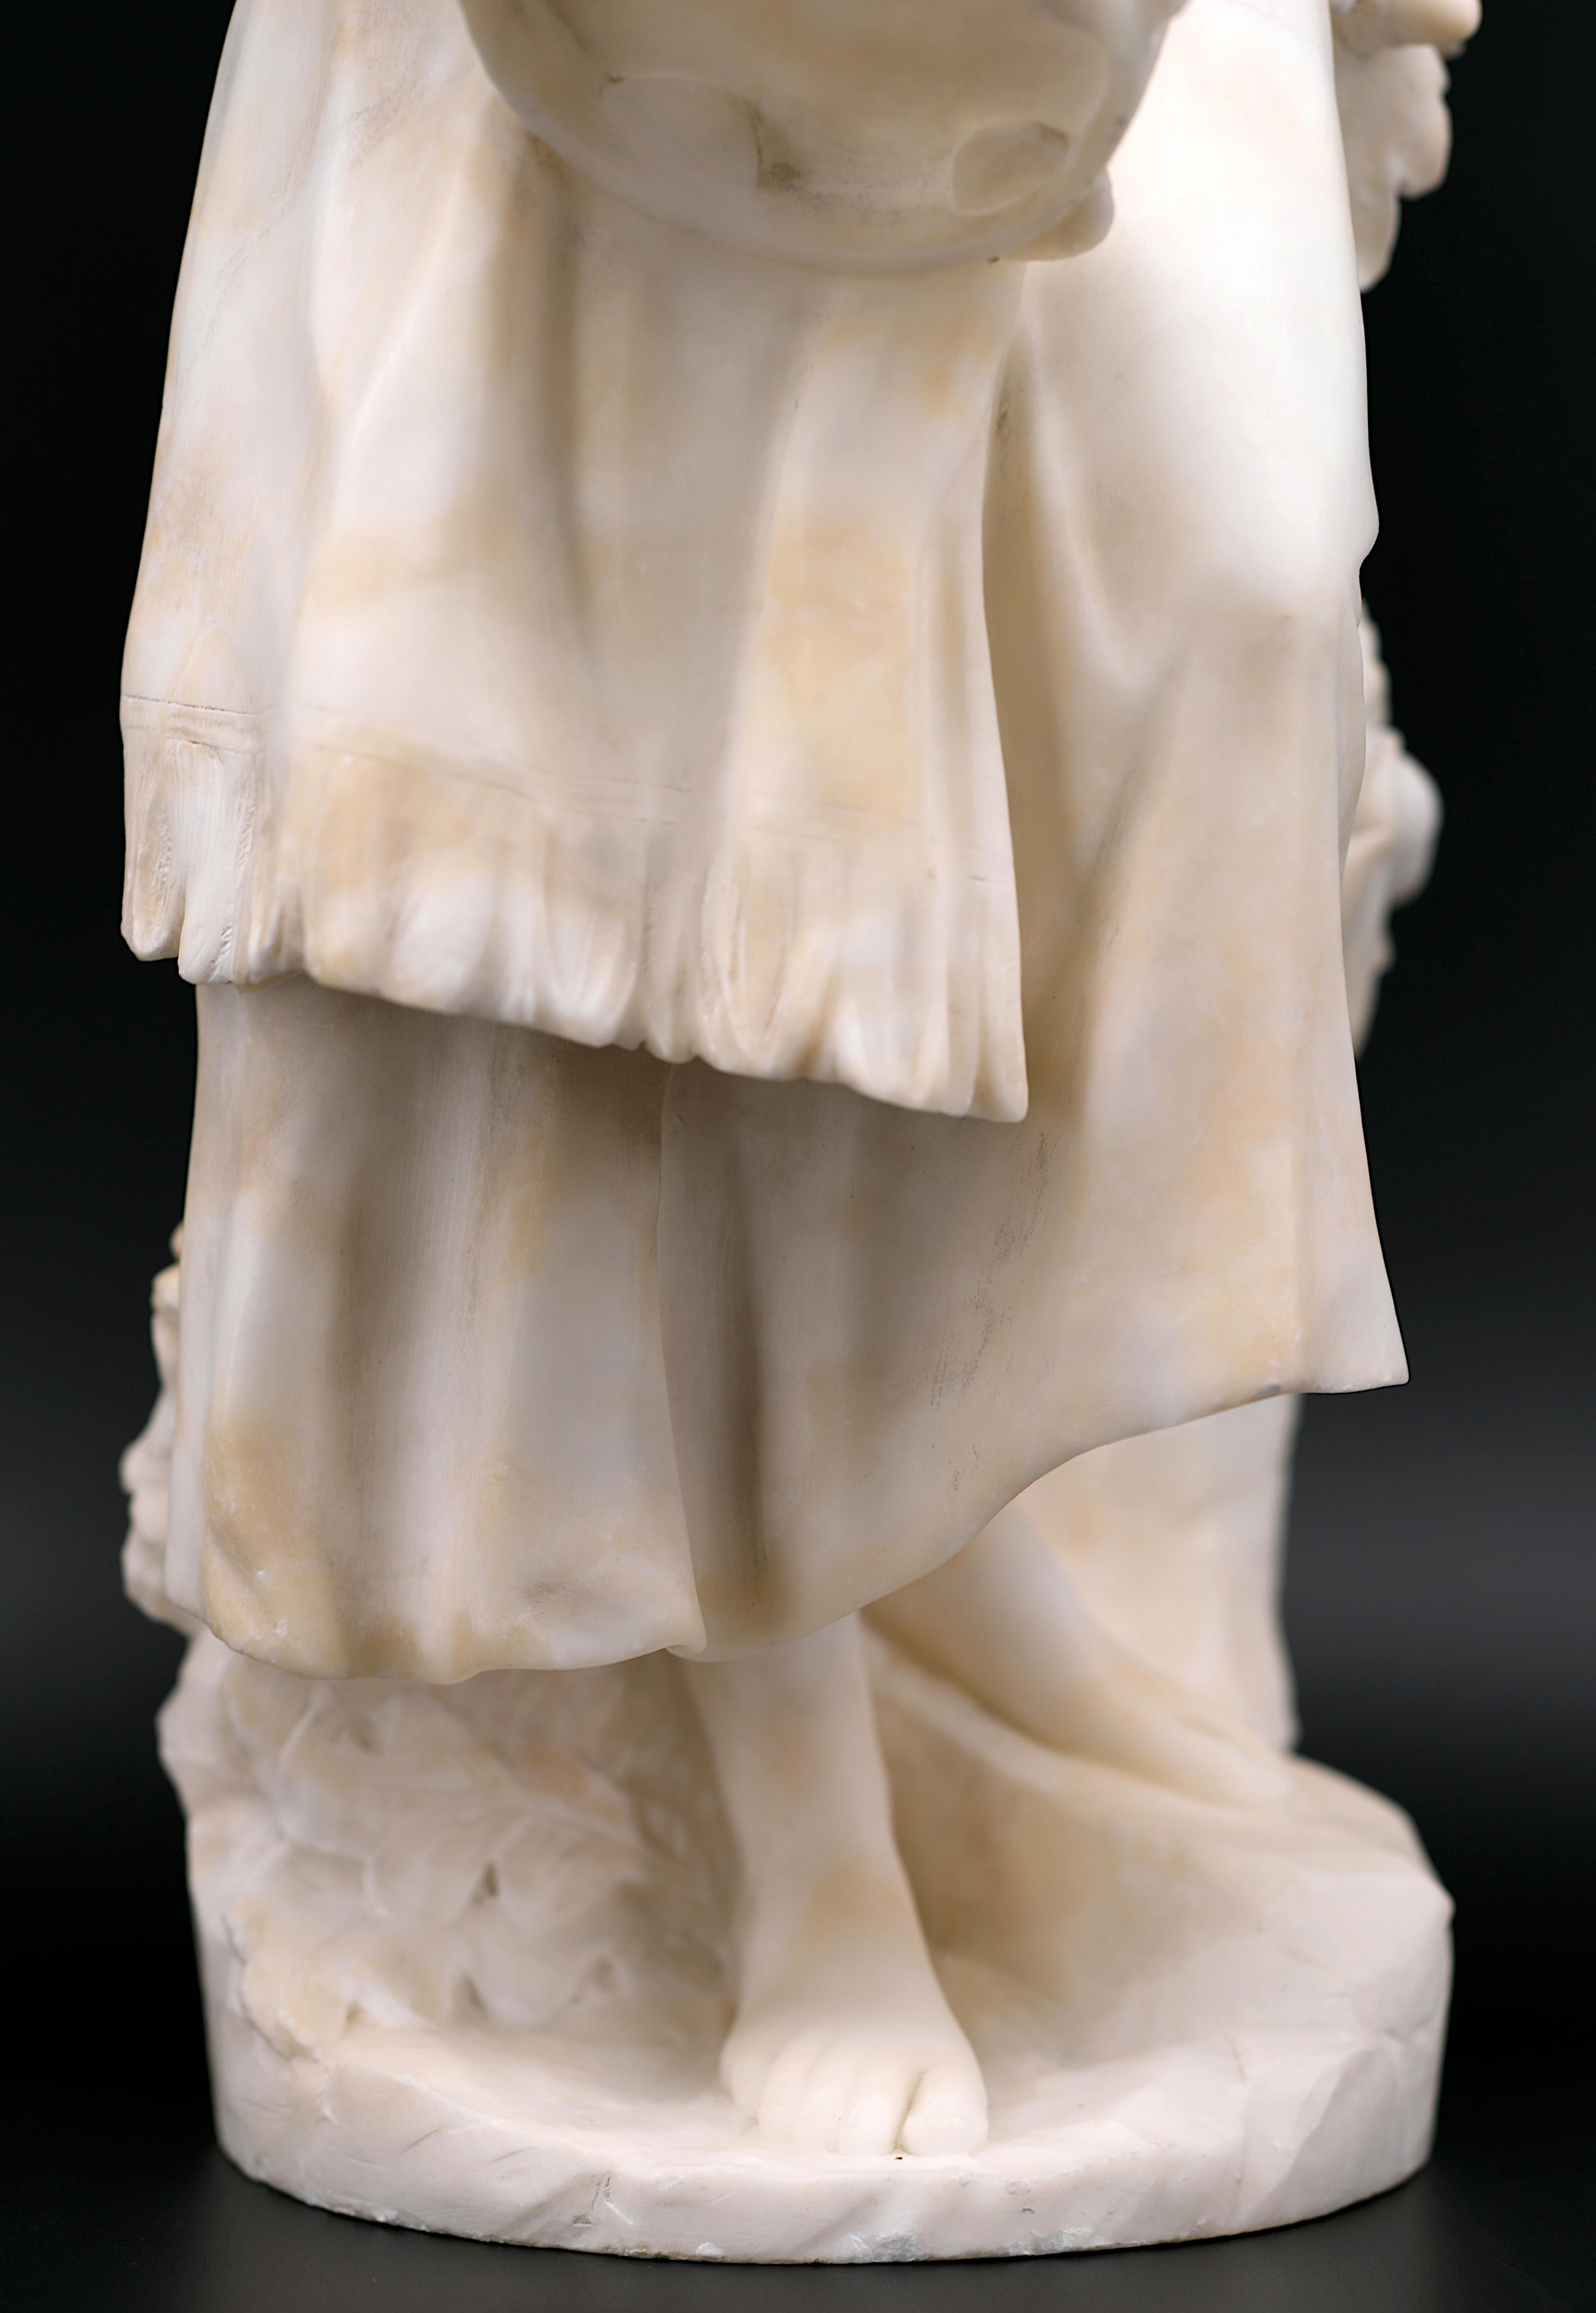 Guglielmo PUGI Young Gipsy with Tambourine Alabaster Sculpture, 1880s For Sale 6